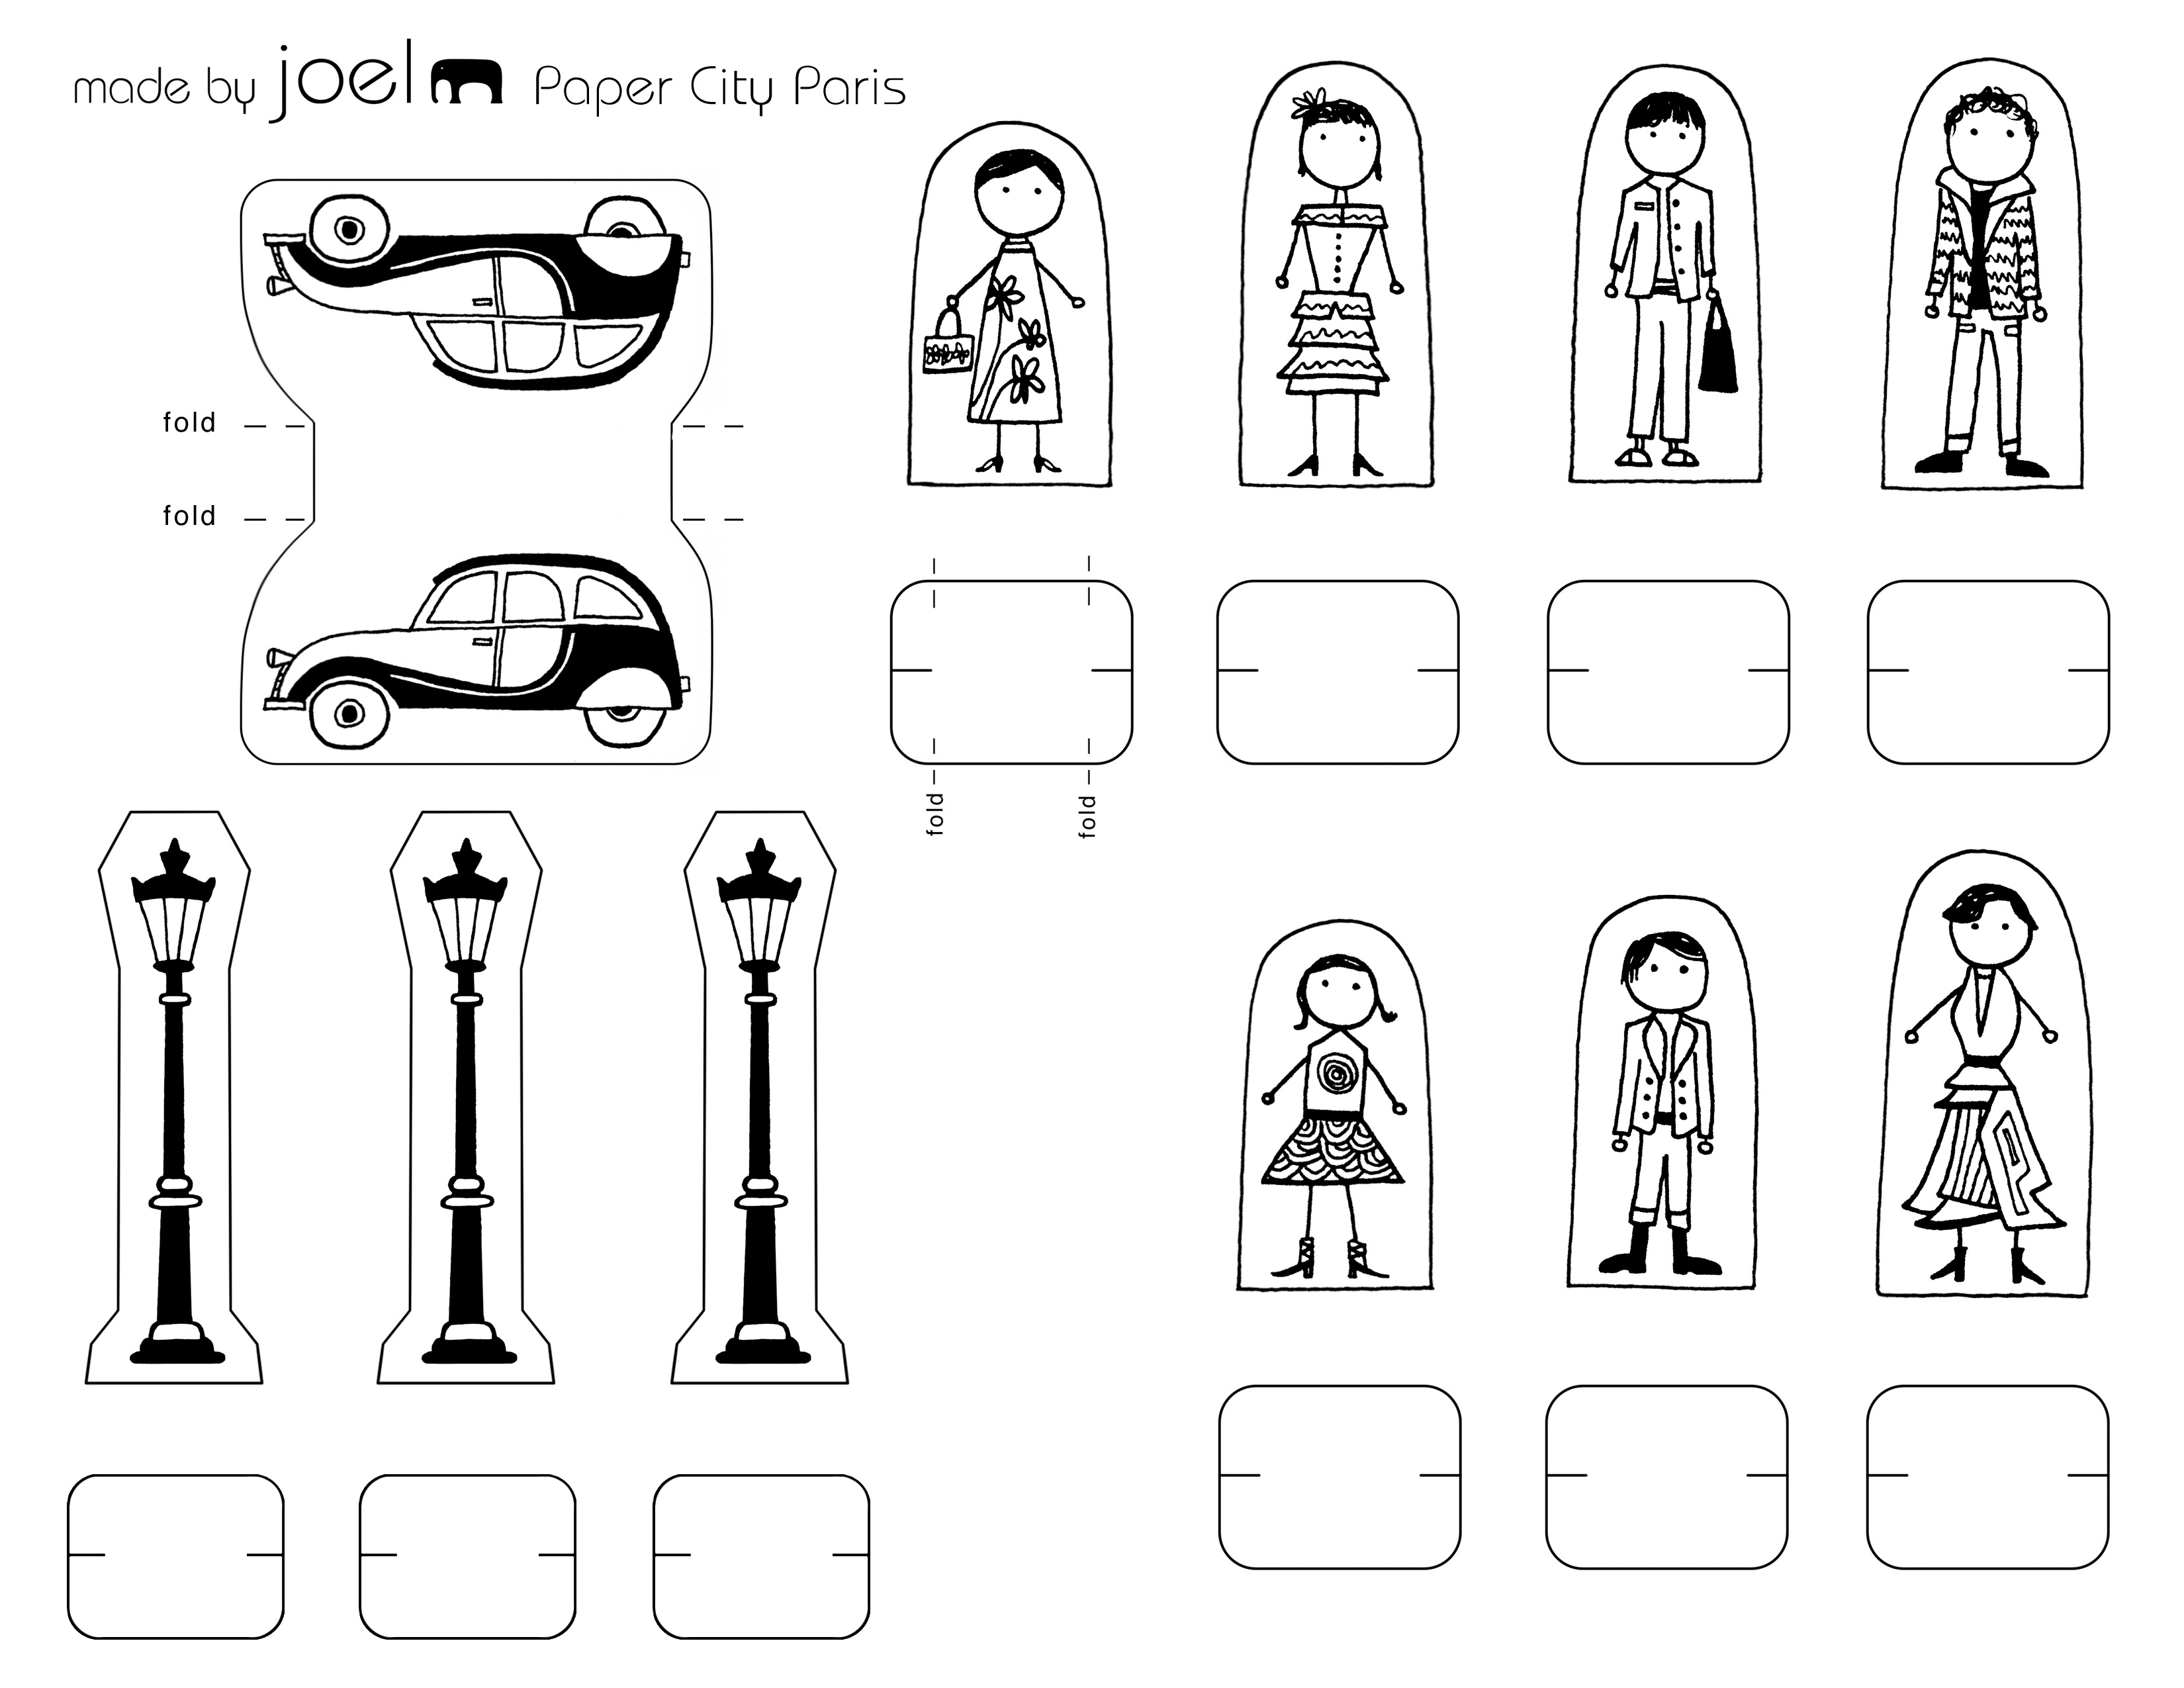 Made by Joel Paper City Paris People Citrone Car and Light Posts – Made